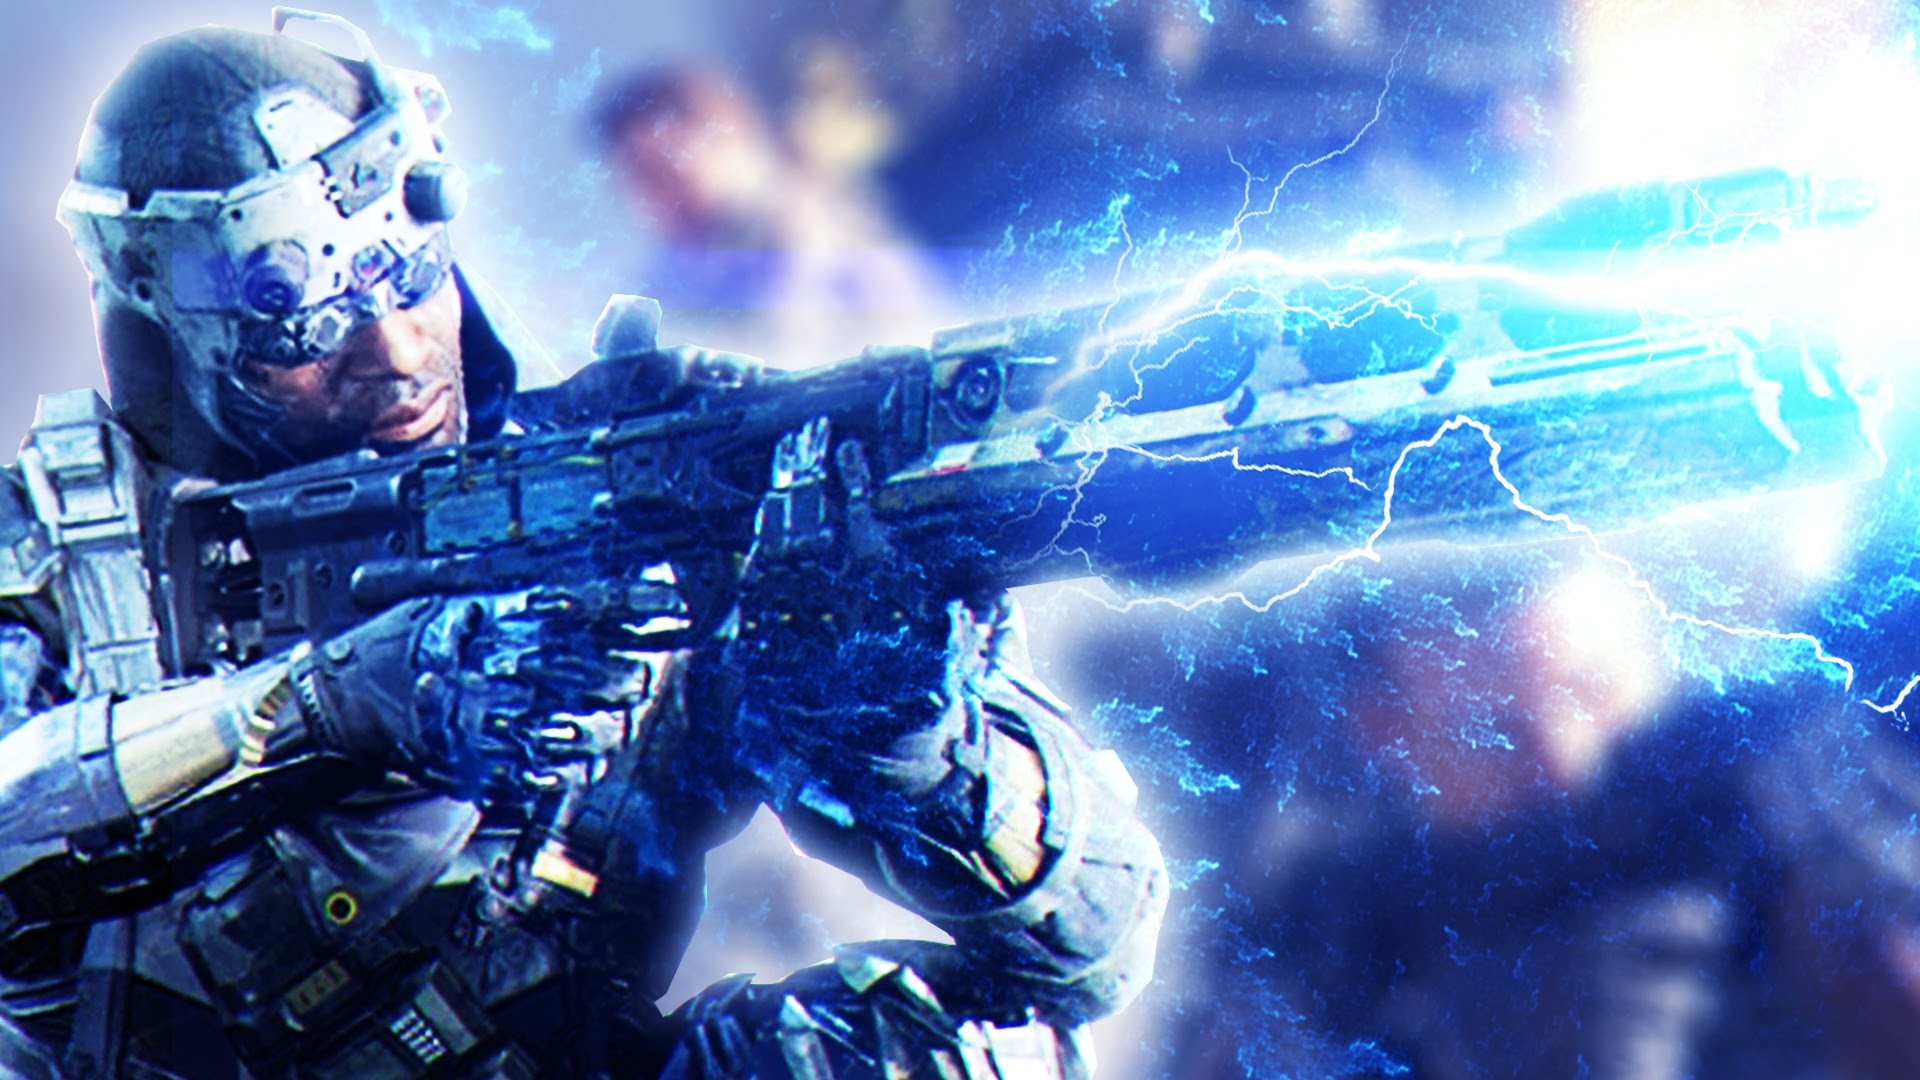 1920x1080 Black Ops 3 Specialist Guide: Prophet "TEMPEST" - (Call of Duty Black Ops 3  Specialists) - YouTube